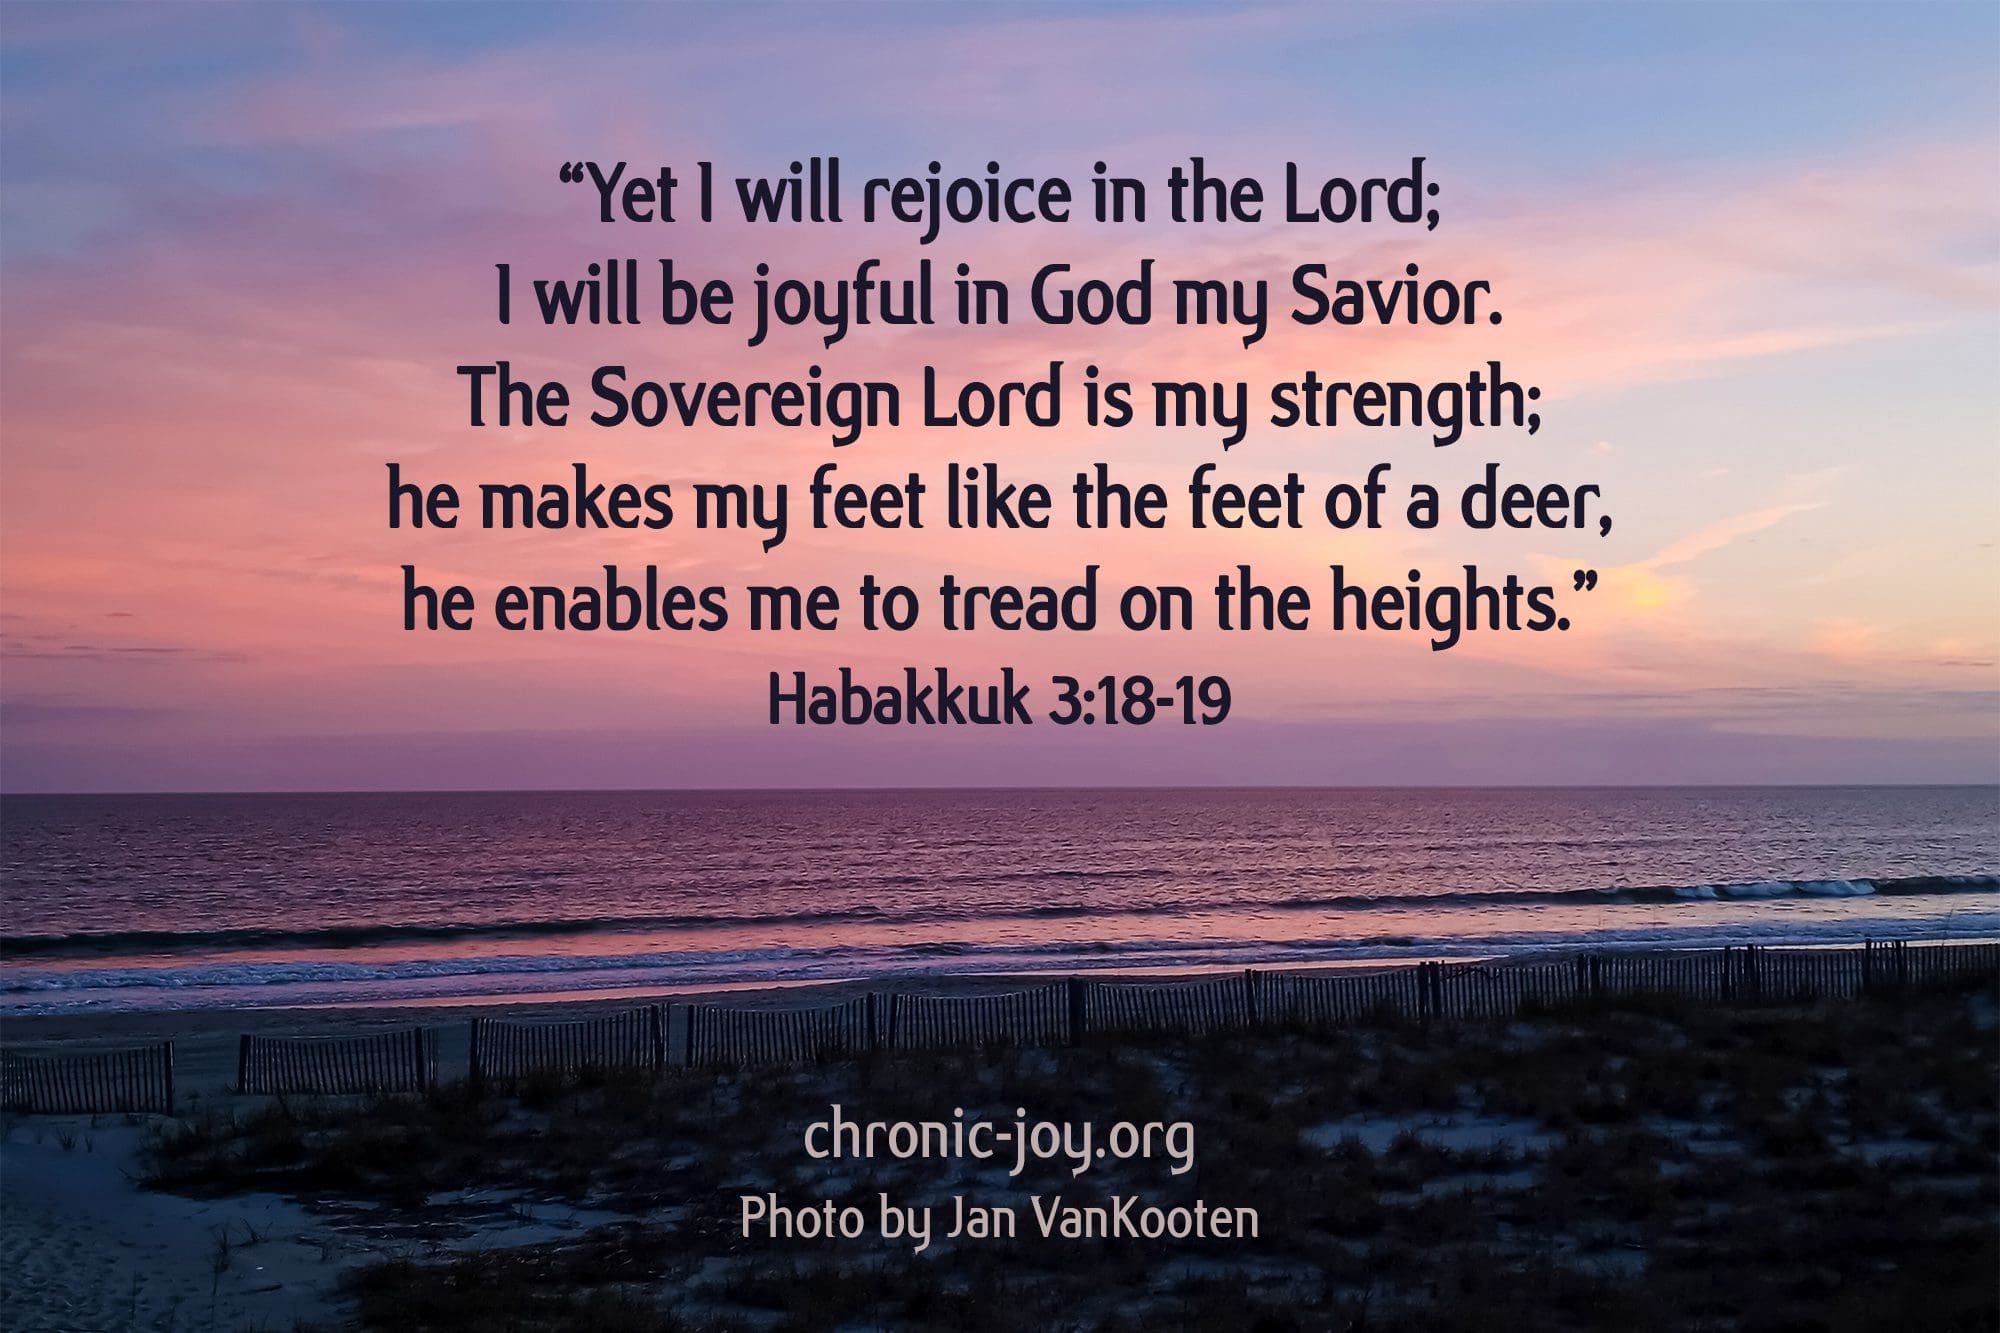 “Yet I will rejoice in the Lord; I will be joyful in God my Savior. The Sovereign Lord is my strength; he makes my feet like the feet of a deer, he enables me to tread on the heights.” Habakkuk 3:18-19